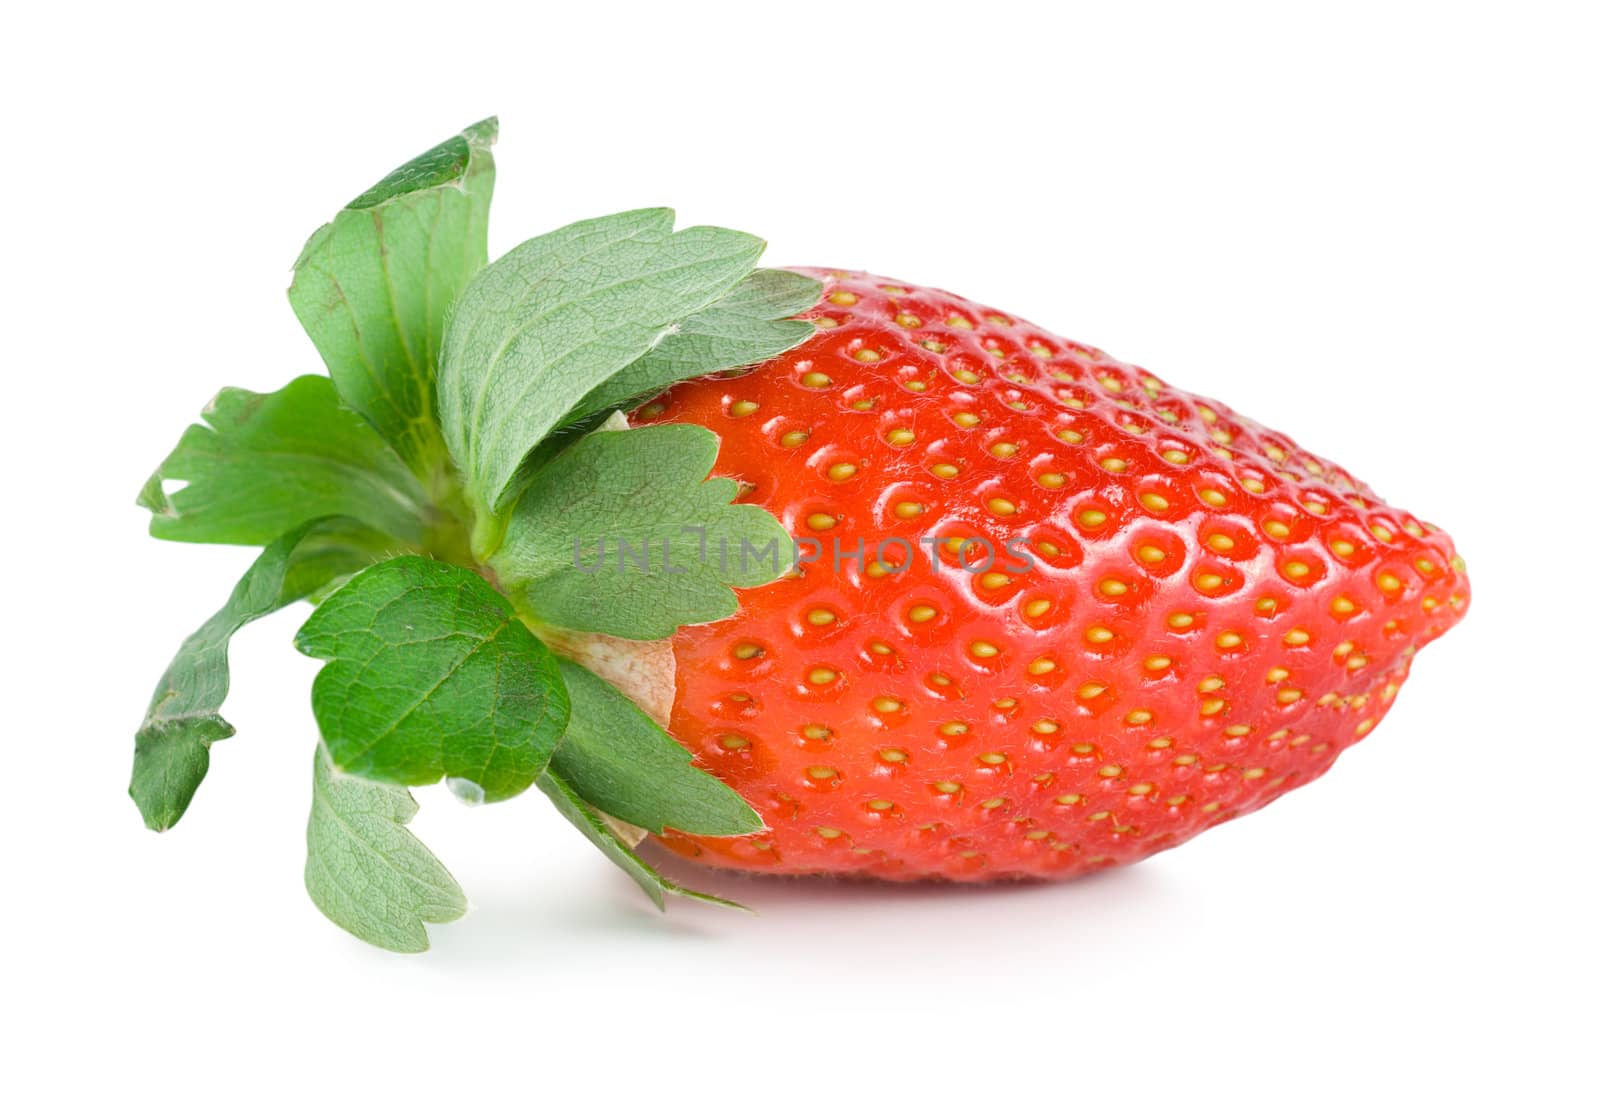 Juicy strawberry by Givaga